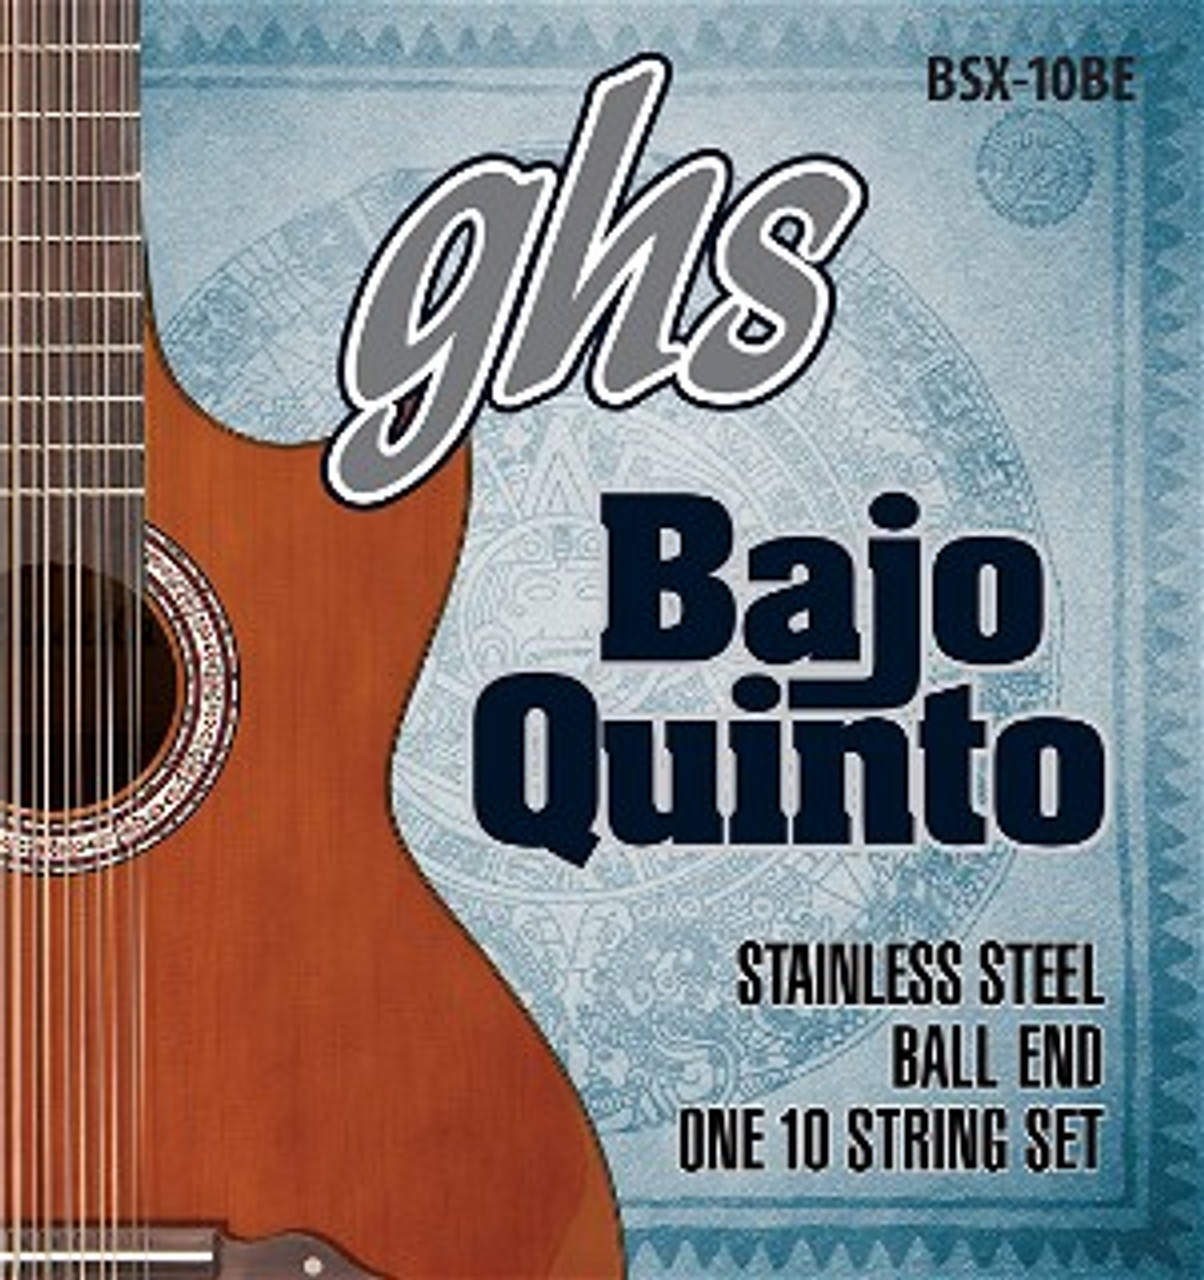 GHS Bajo Quinto Strings Stainless Steel Set Ball End